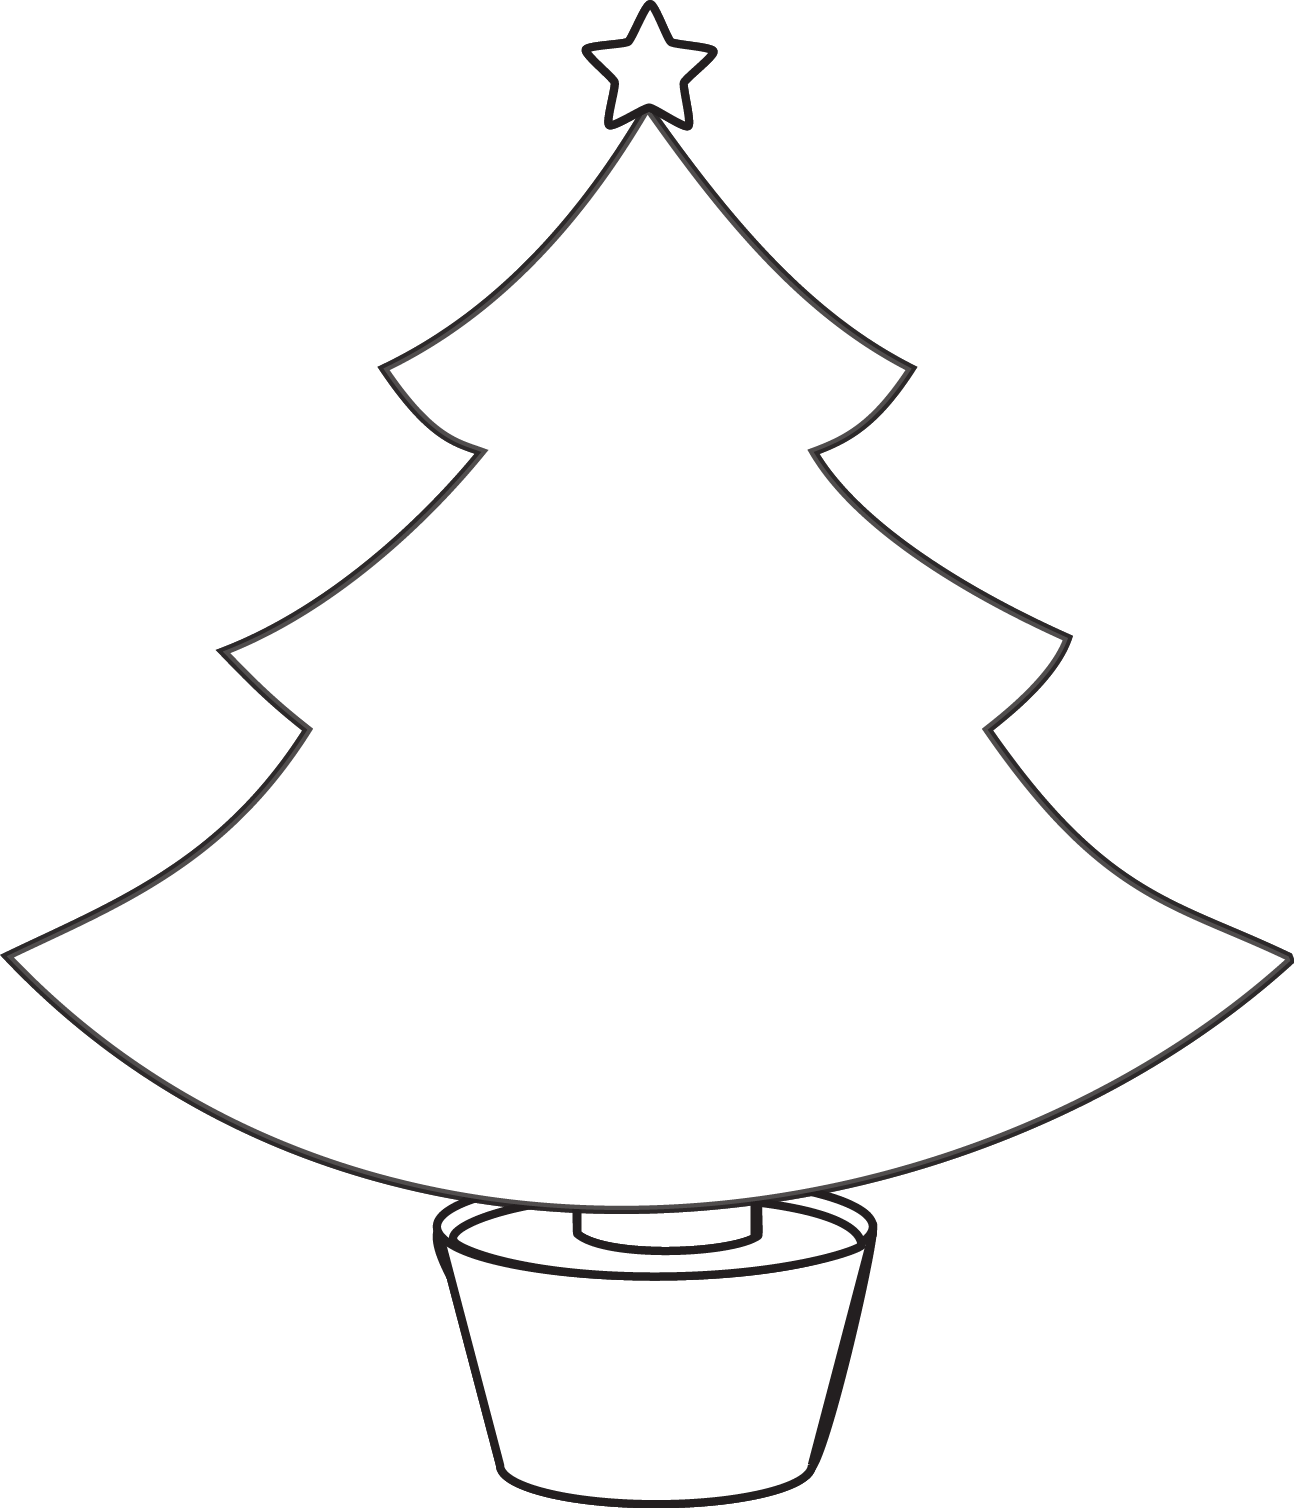 Light Bulb Coloring Pages | Clipart Panda - Free Clipart Images